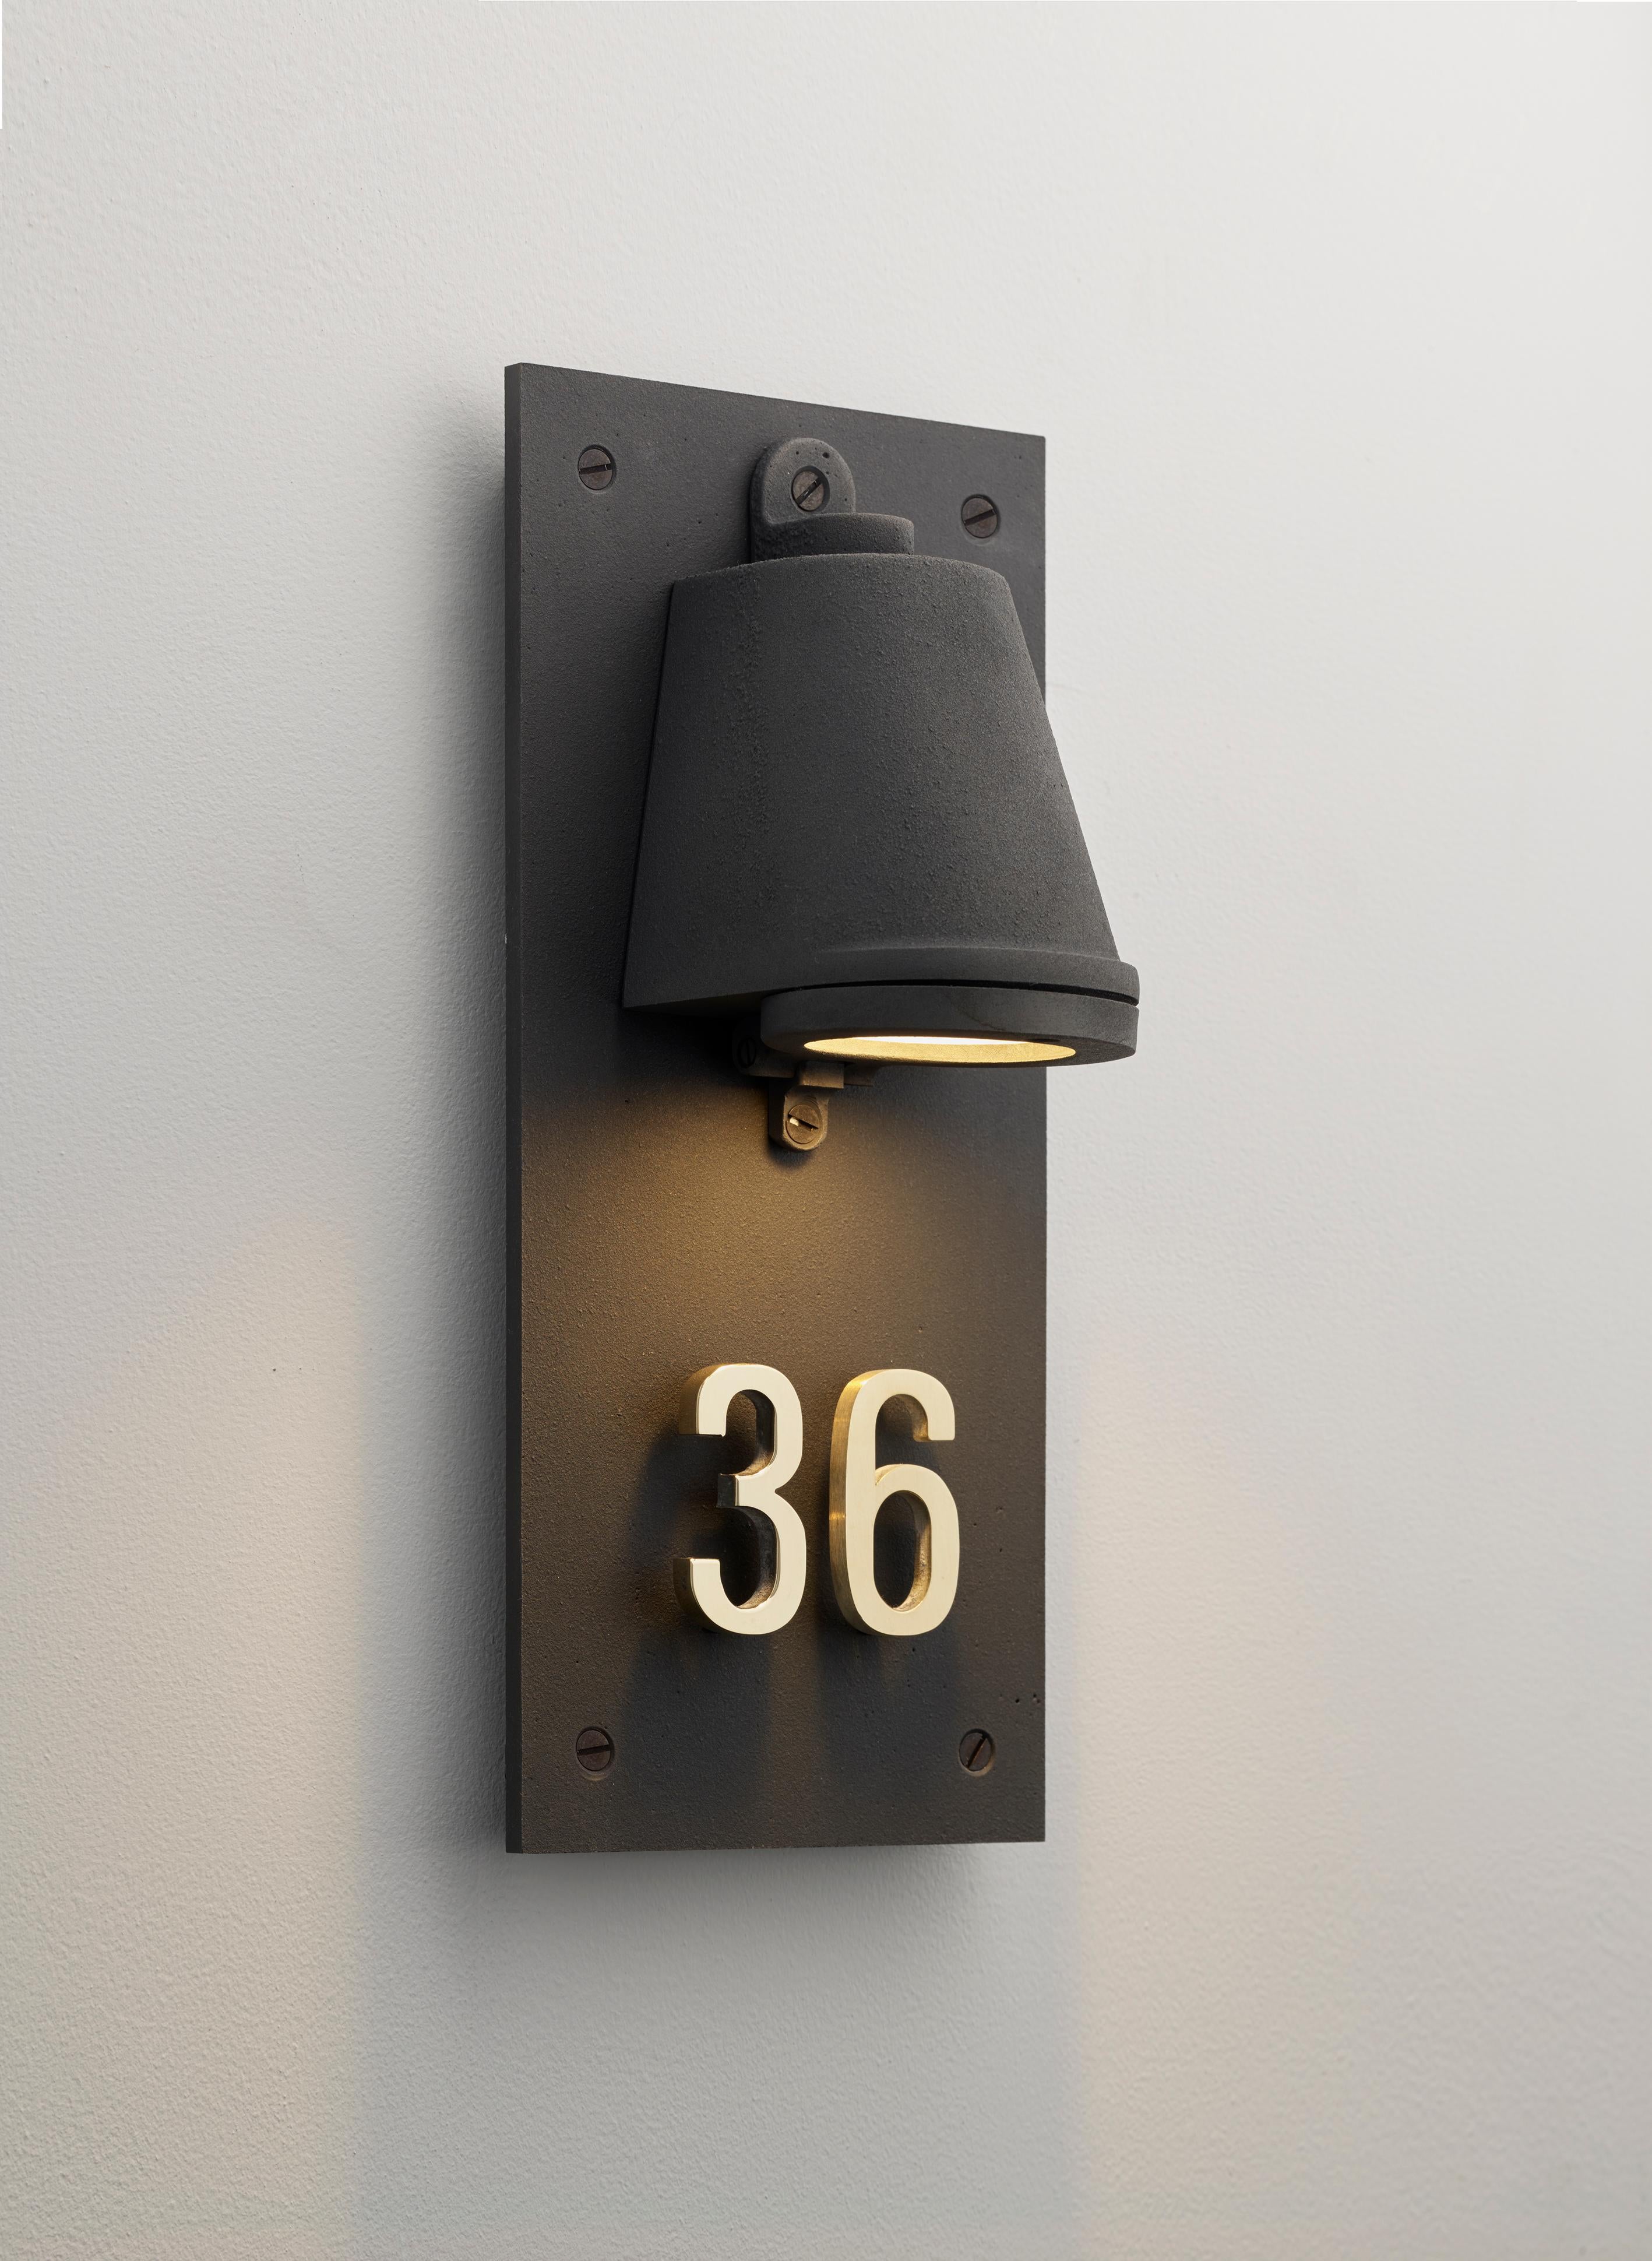 Wall light in sand casted brass with frosted glass. For outdoor use (IP43).

LED module 230V 4,3W 2700K 145lm. Main power 230V 50Hz.